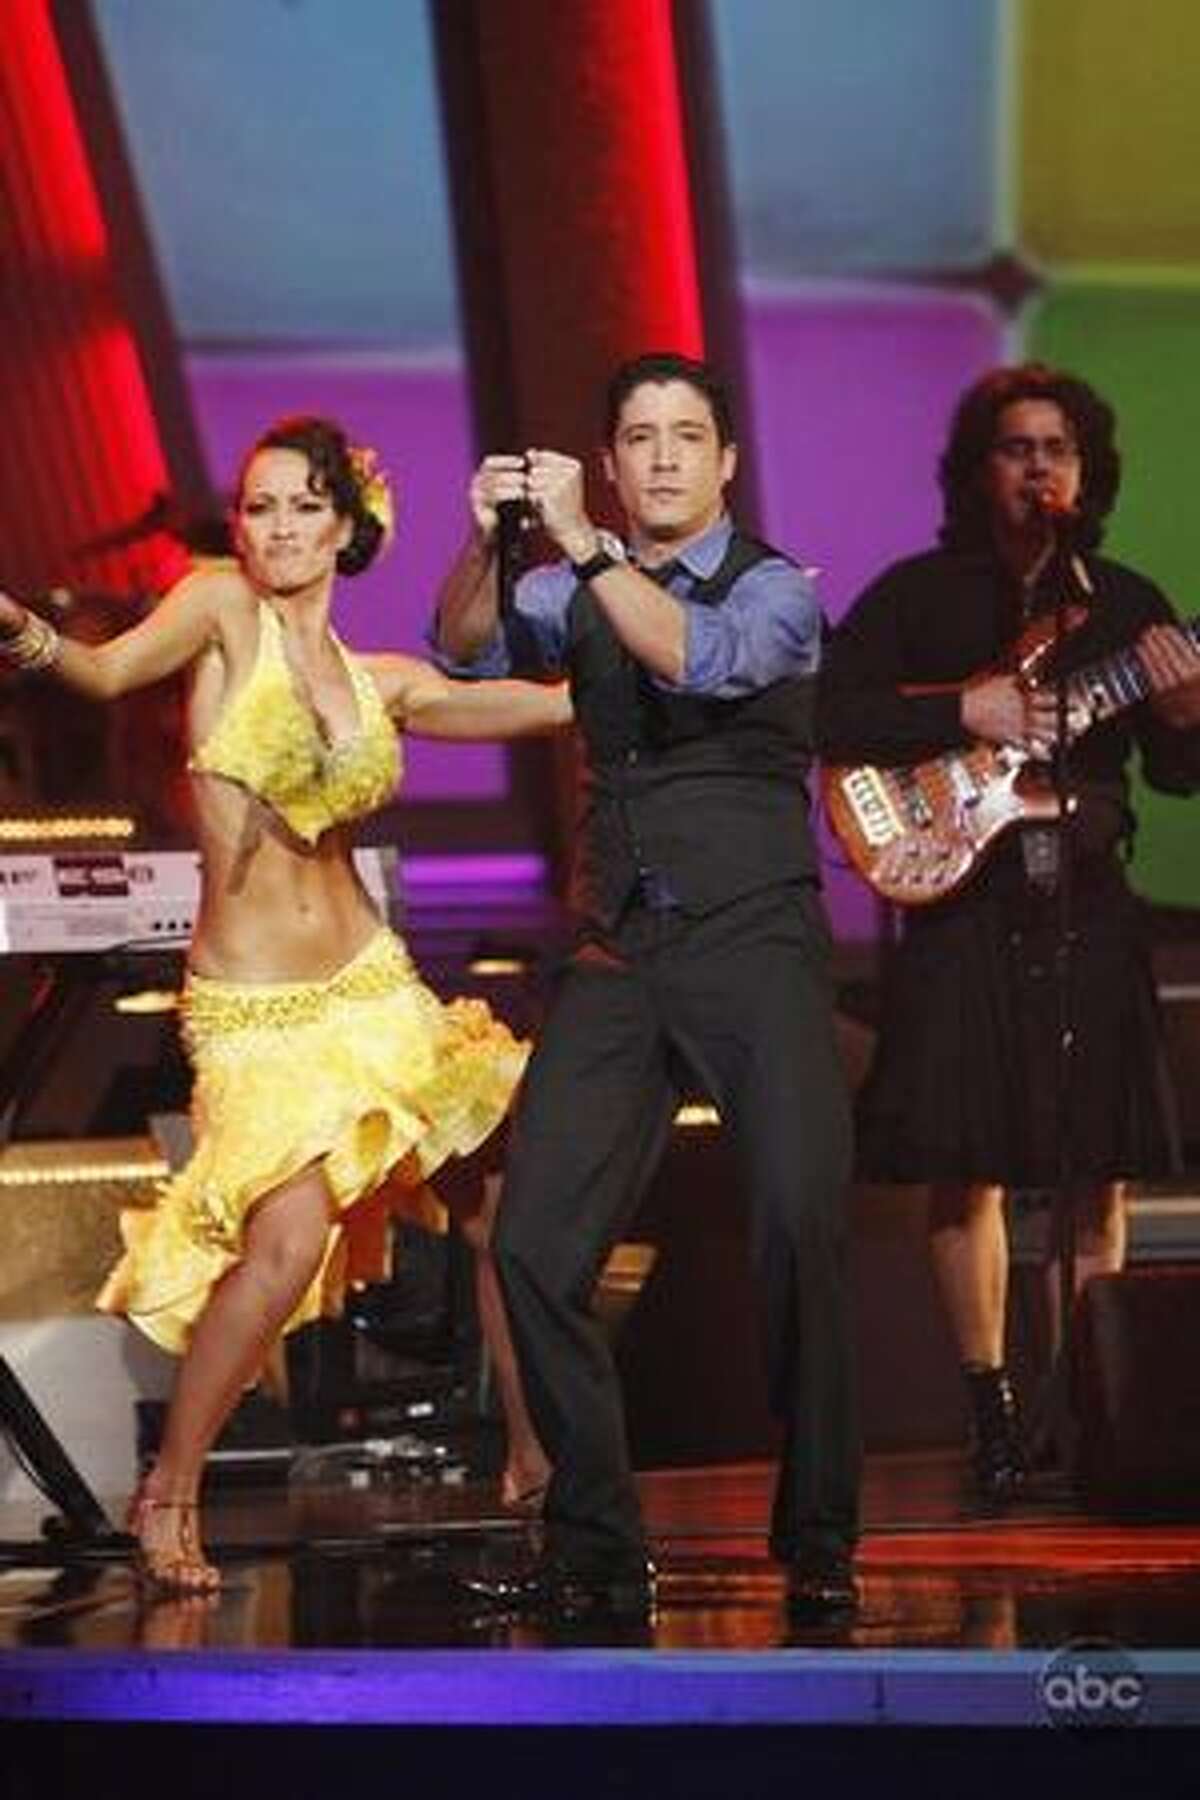 Cuban superstars Tiempo Libre took to the stage to performing "Tu Conga Bach."